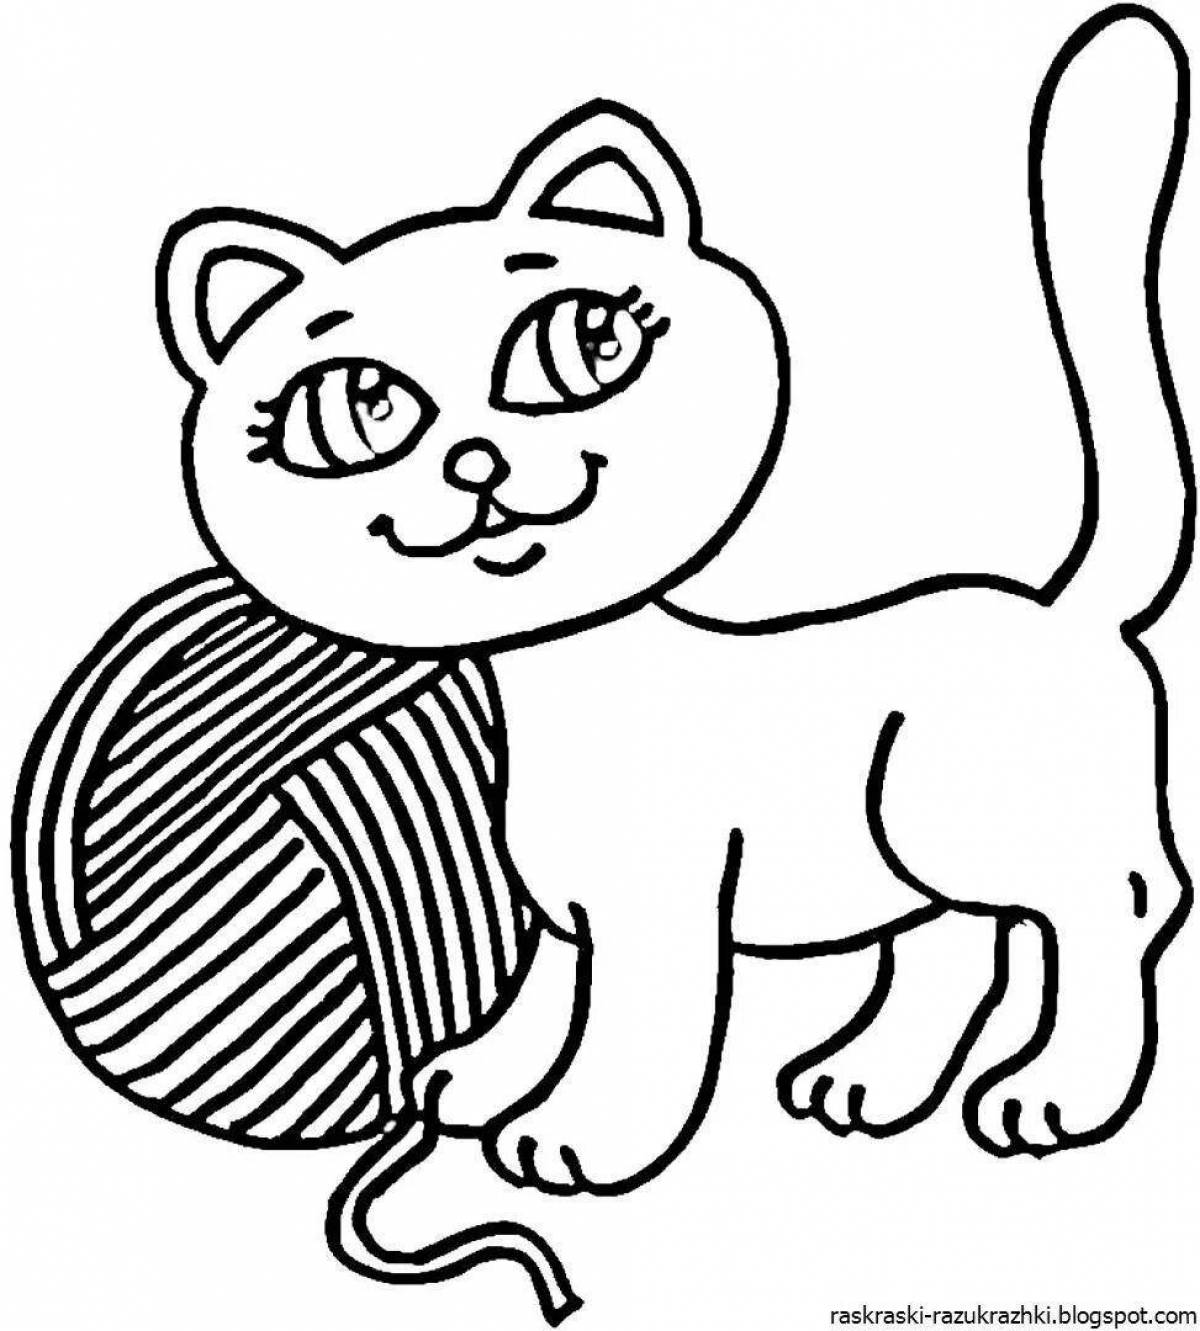 Colorful kitten coloring book for 2-3 year olds